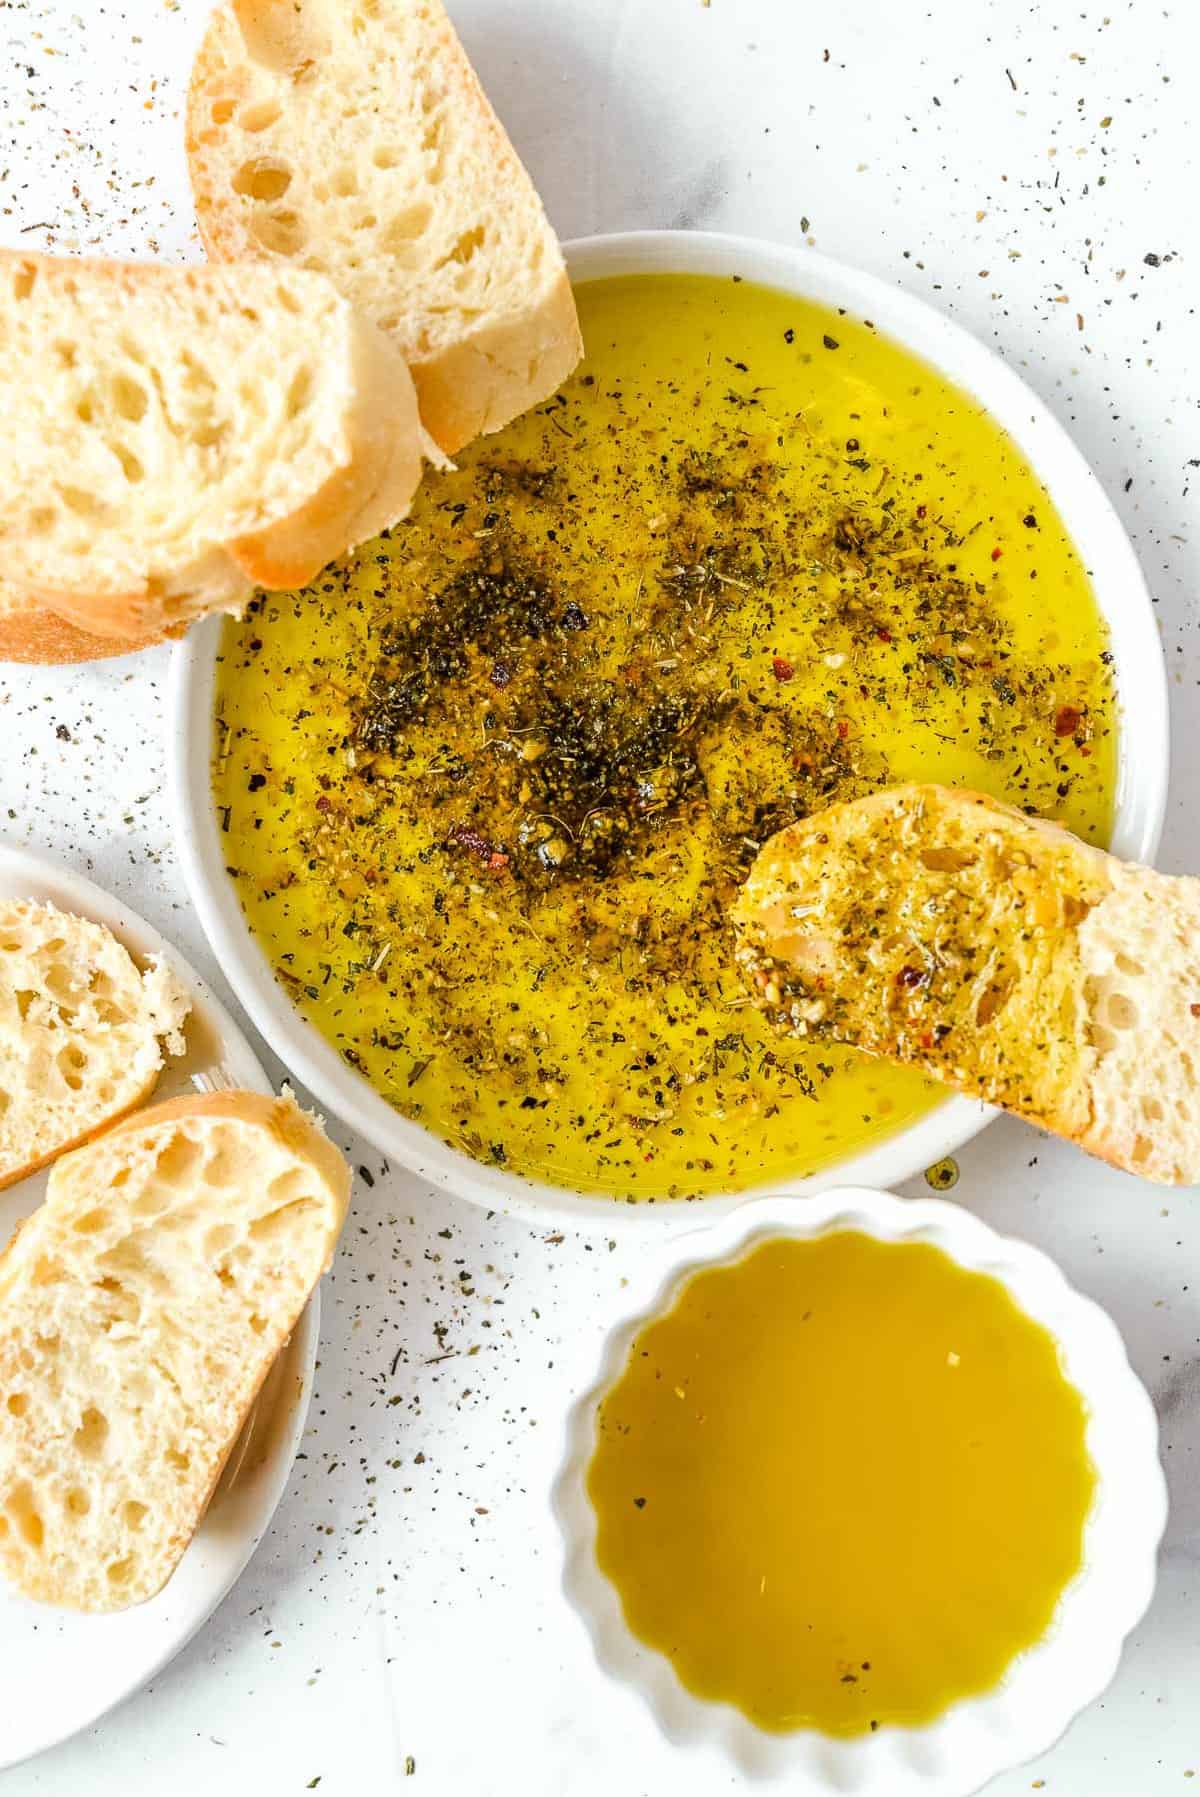 oil with Italian seasoning for dipping bread